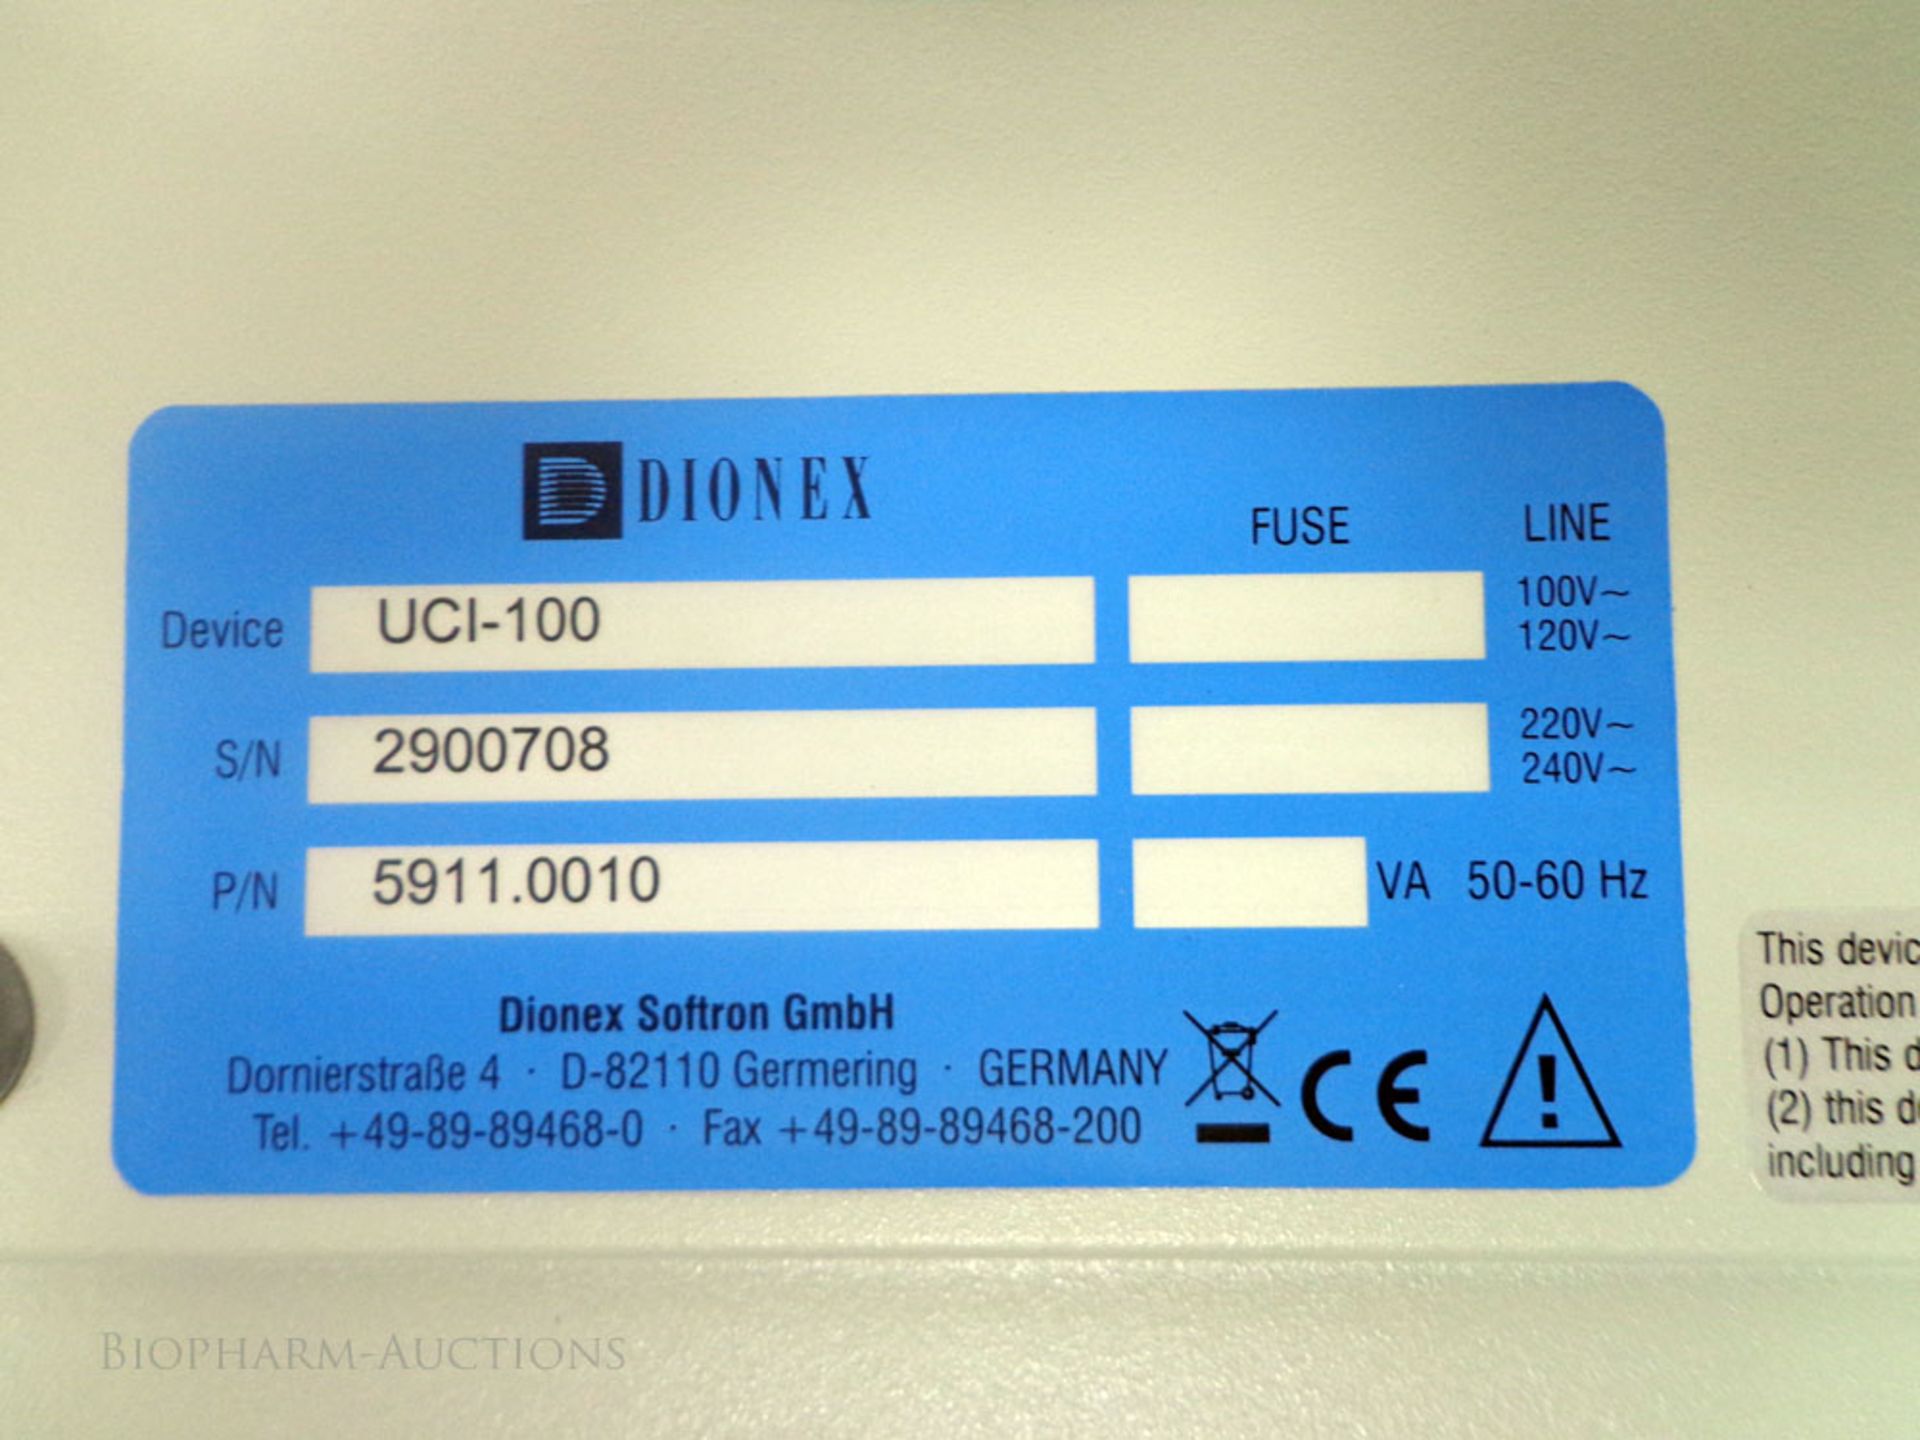 DIONEX Universal Chromatography Interface UCI-100, S/N 2900708. P/N 5911.0010 - Image 4 of 6